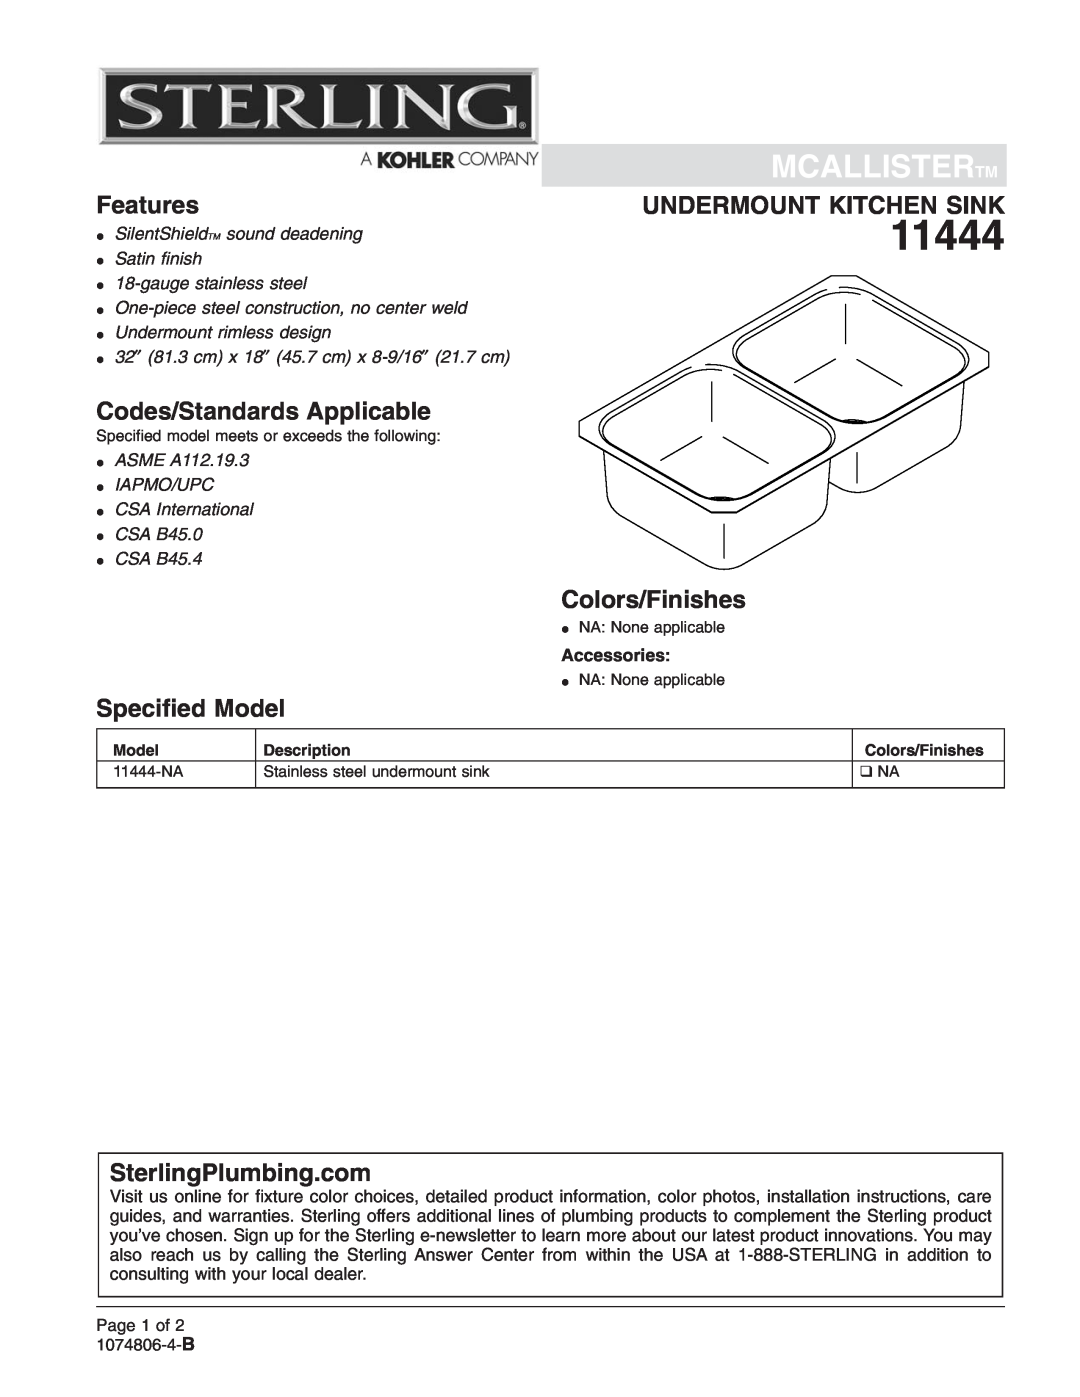 Sterling Plumbing 11444-NA installation instructions Mcallistertm, Features, Undermount Kitchen Sink, Colors/Finishes 